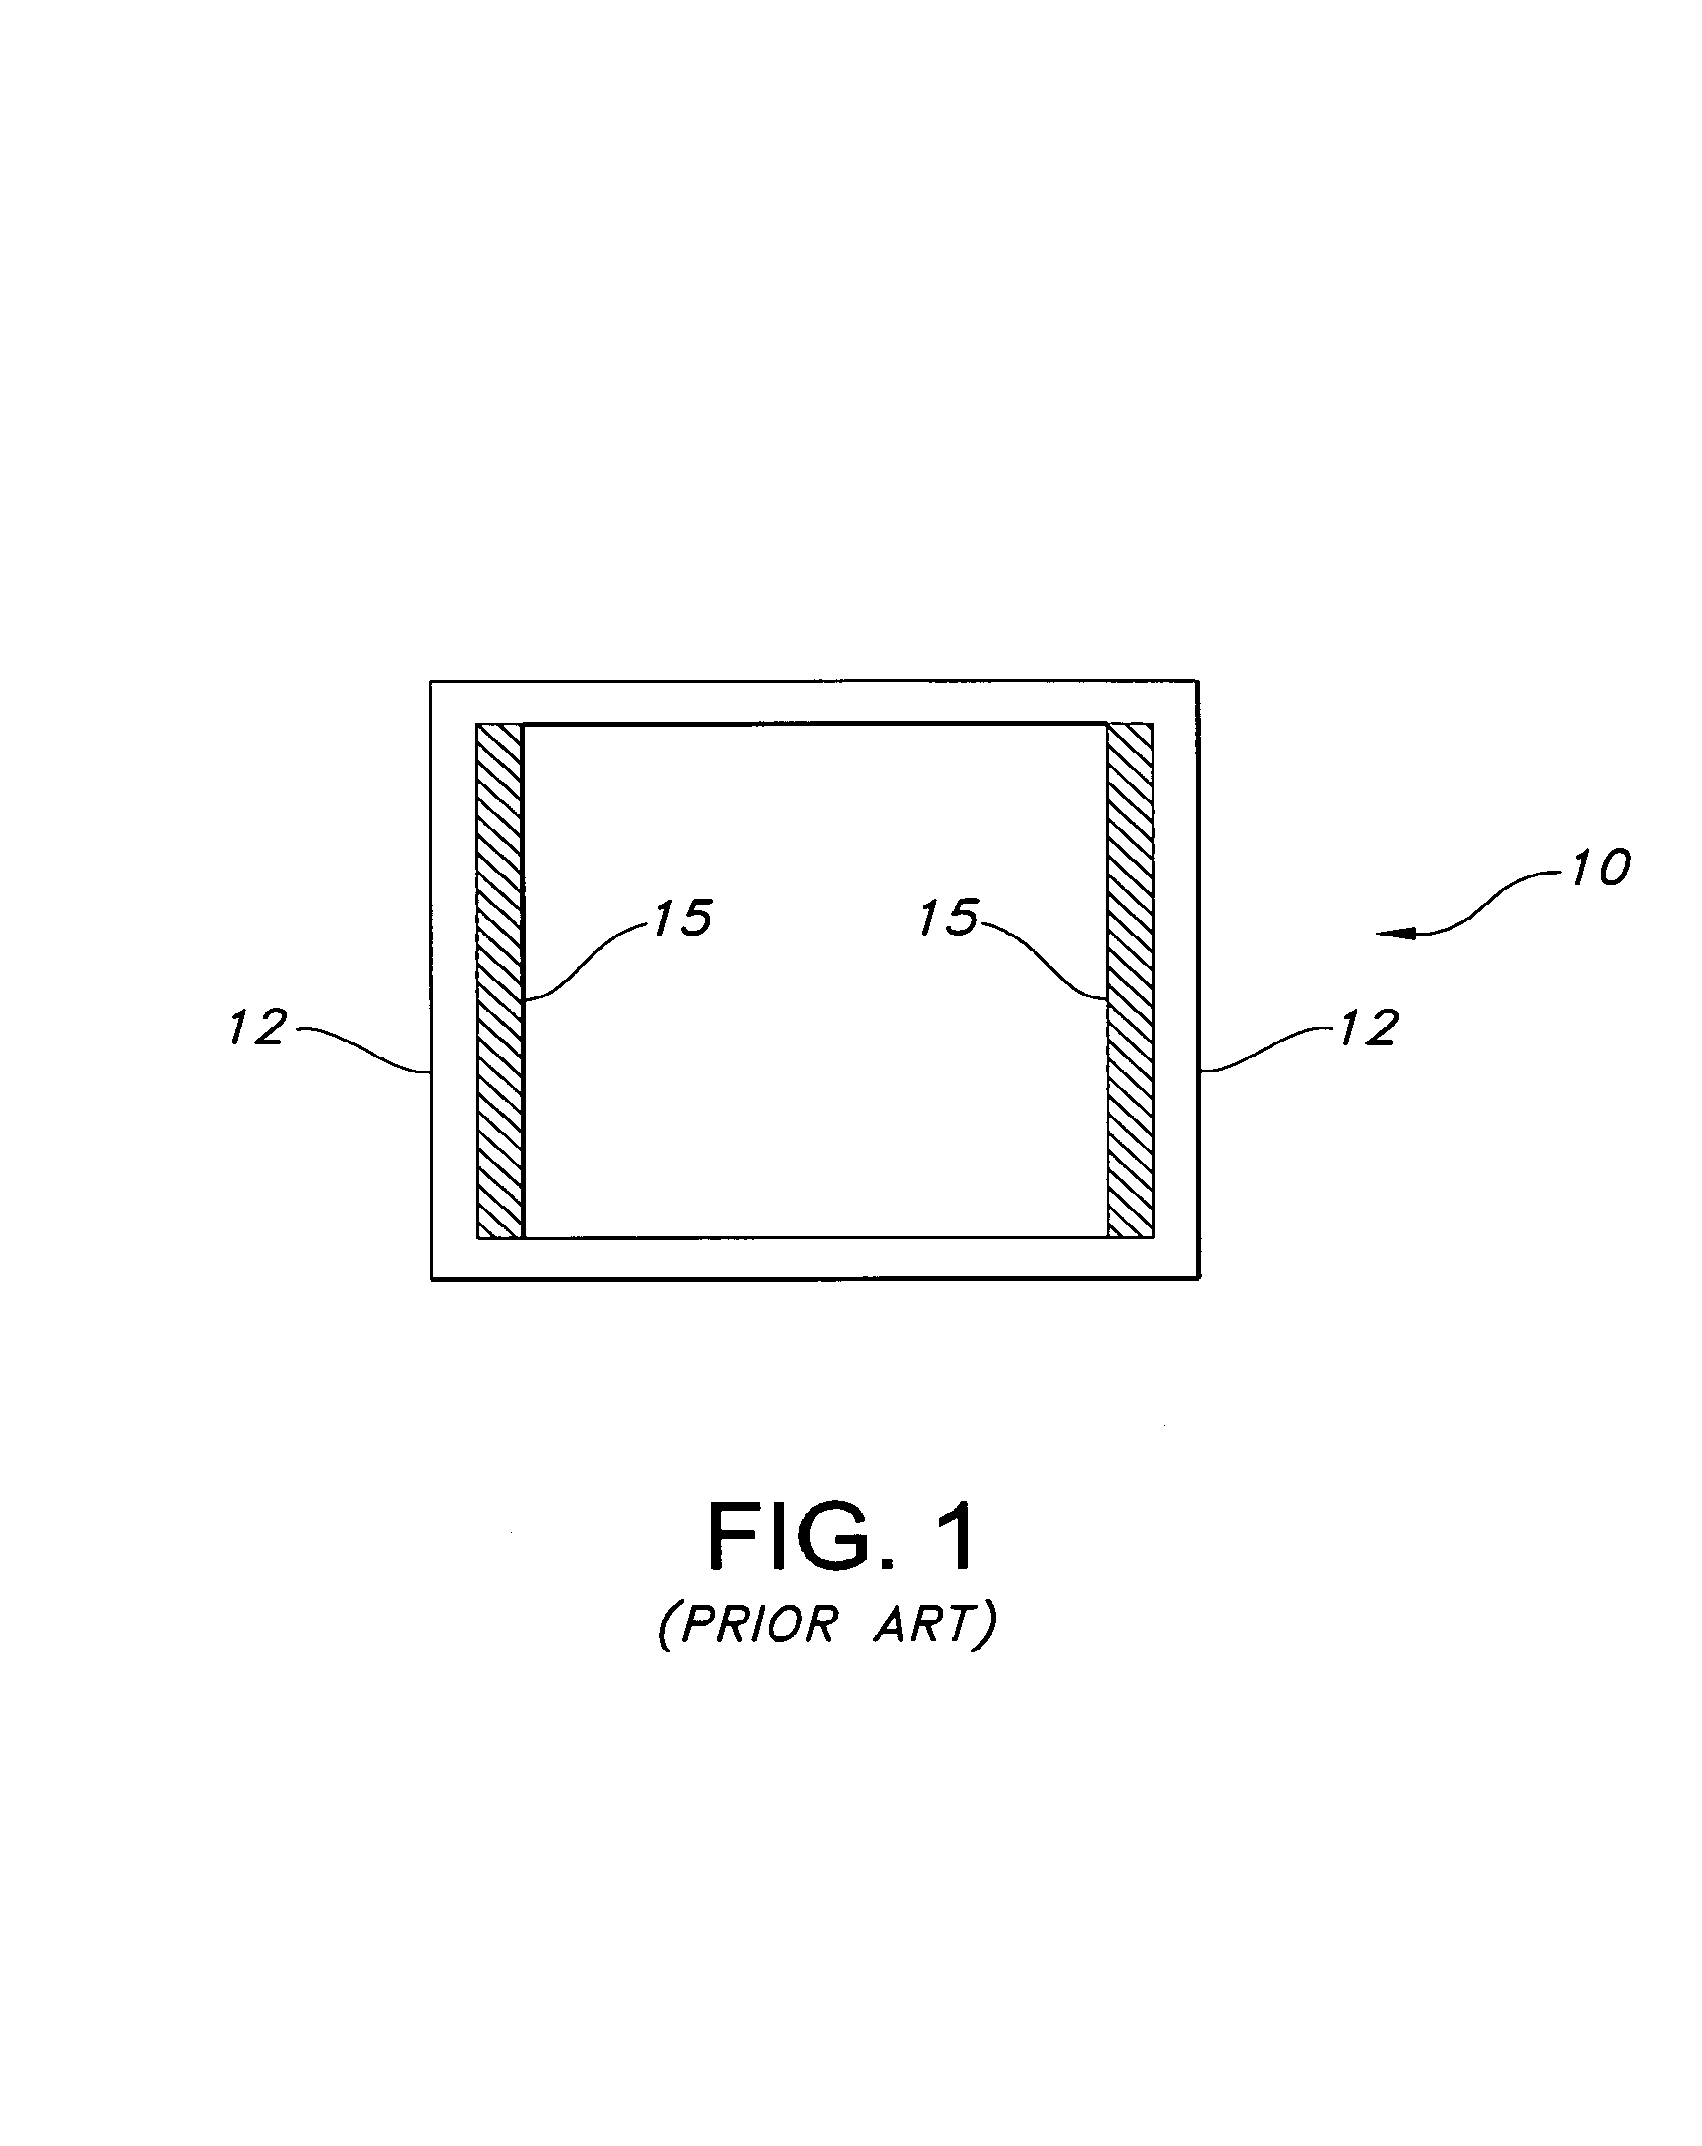 Stacked dual-band electromagnetic band gap waveguide aperture with independent feeds